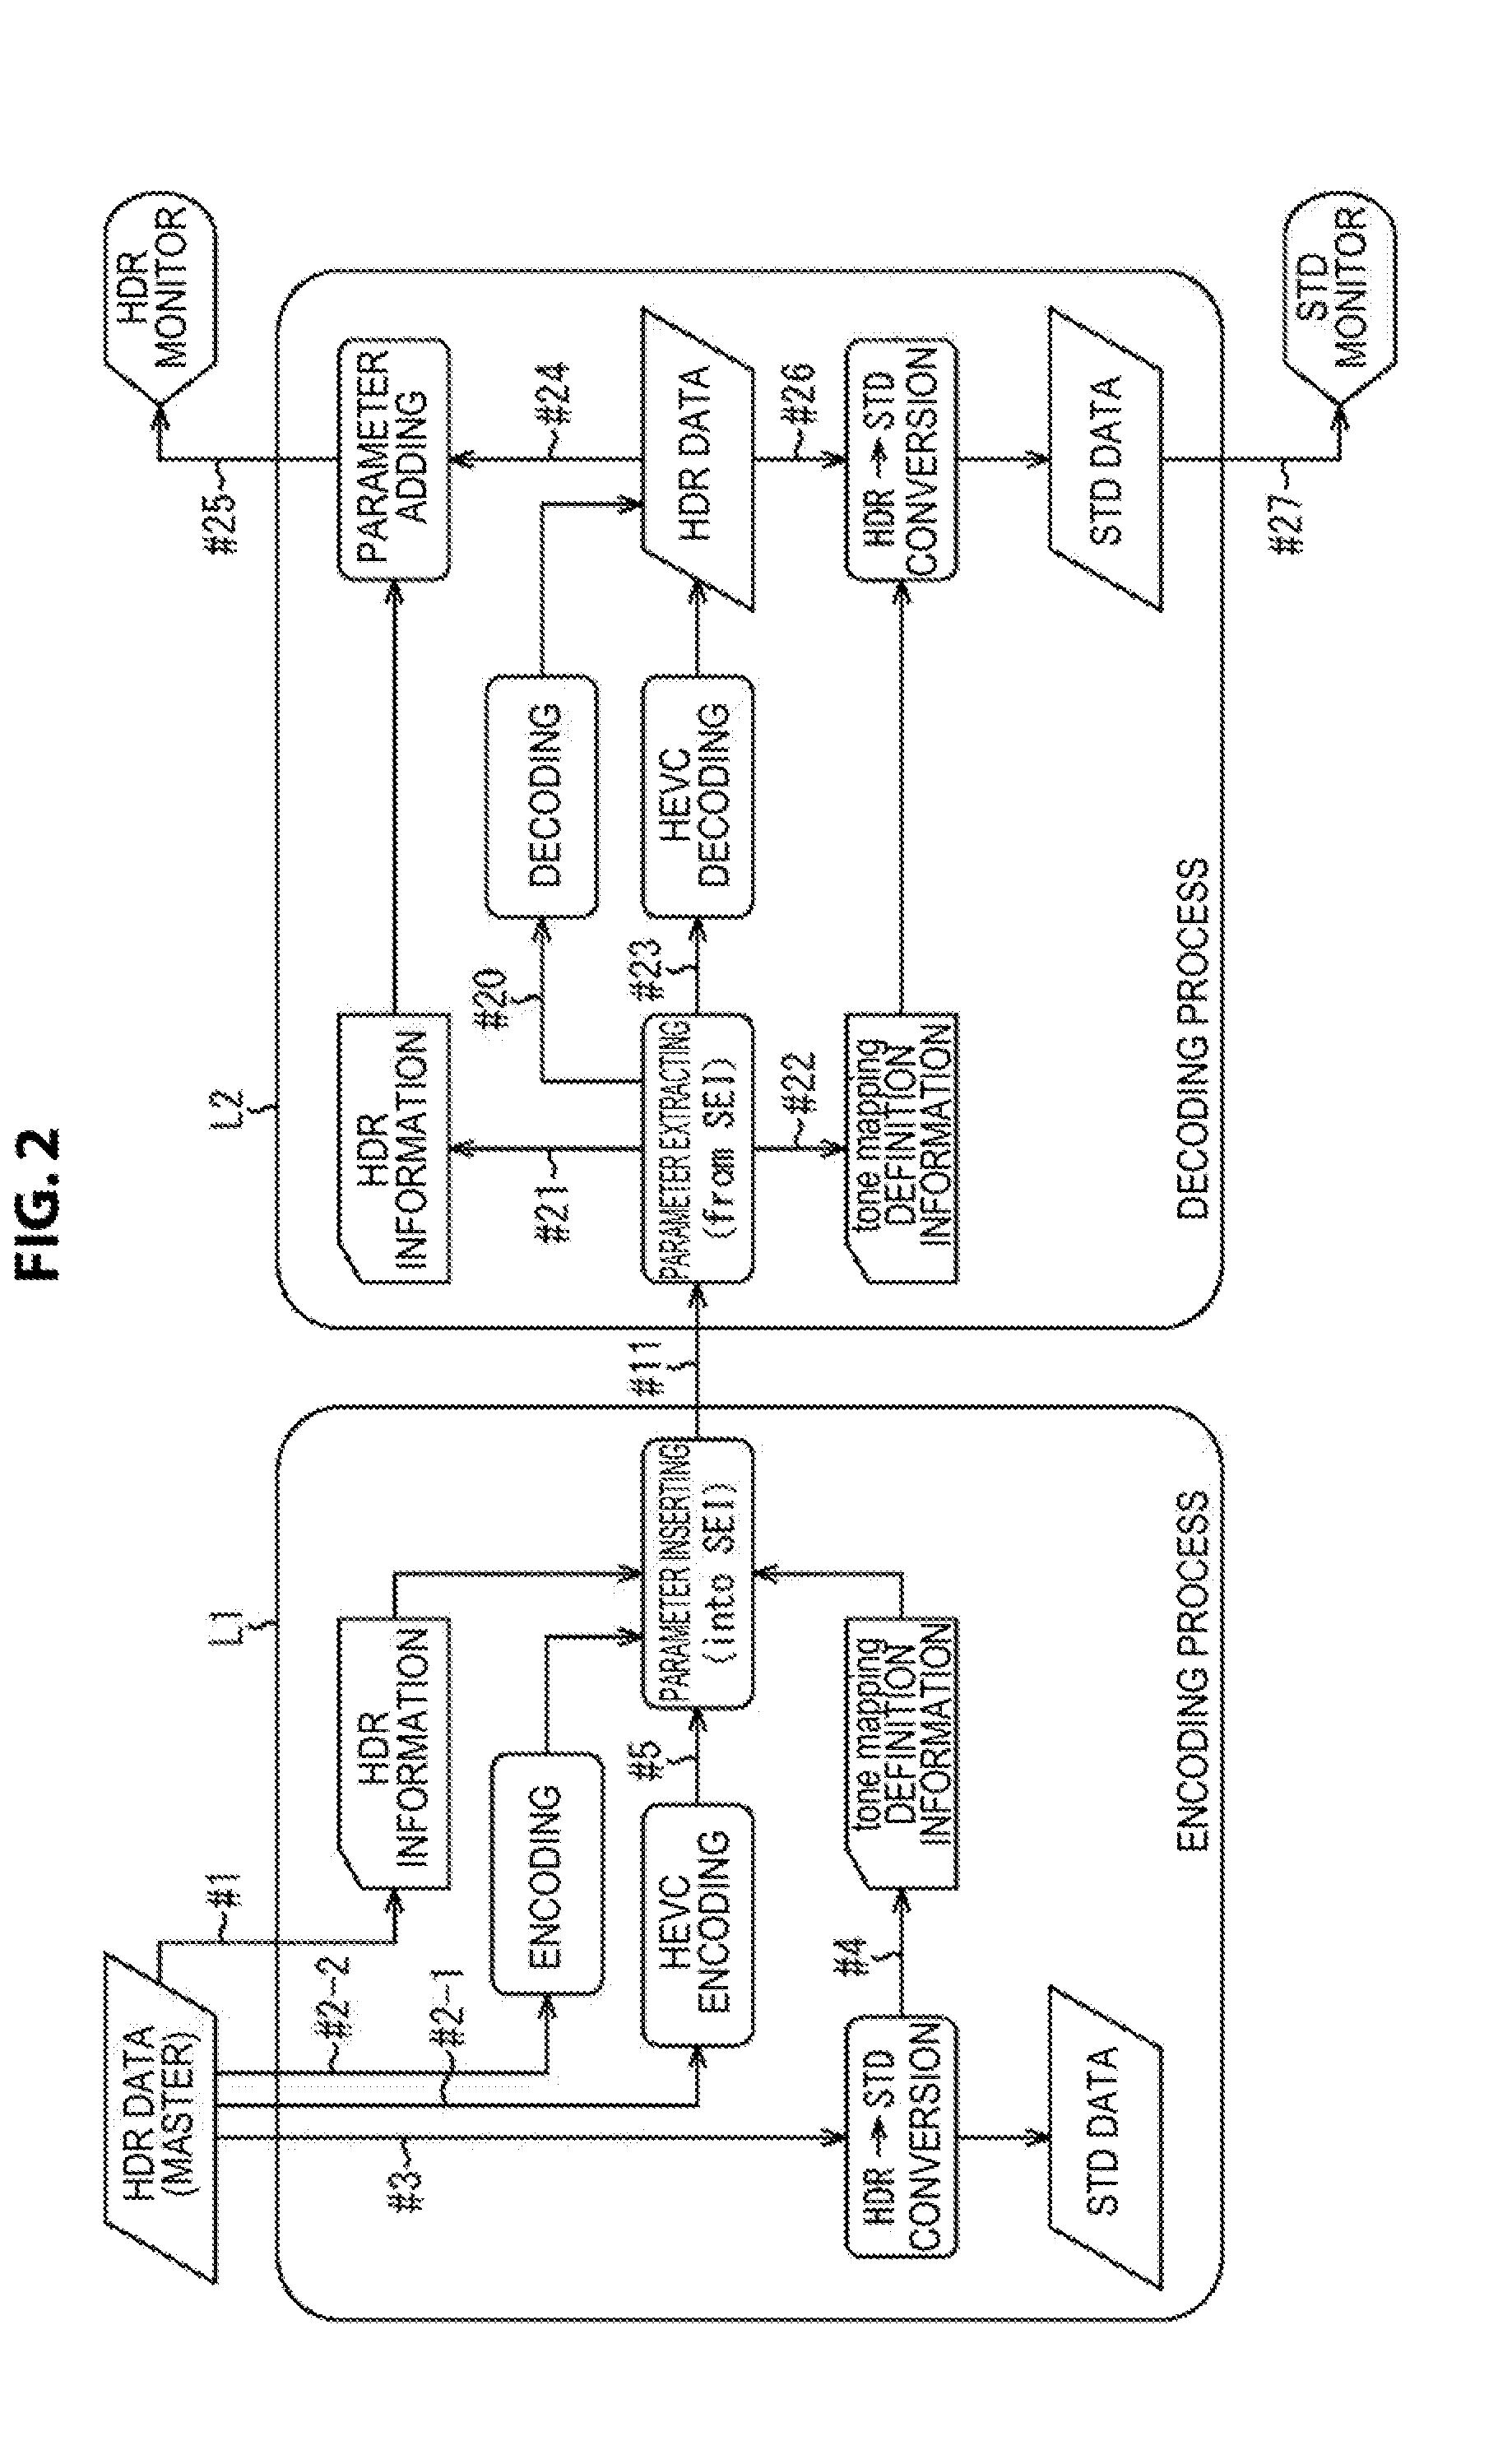 Reproduction device, reproduction method, and recording medium